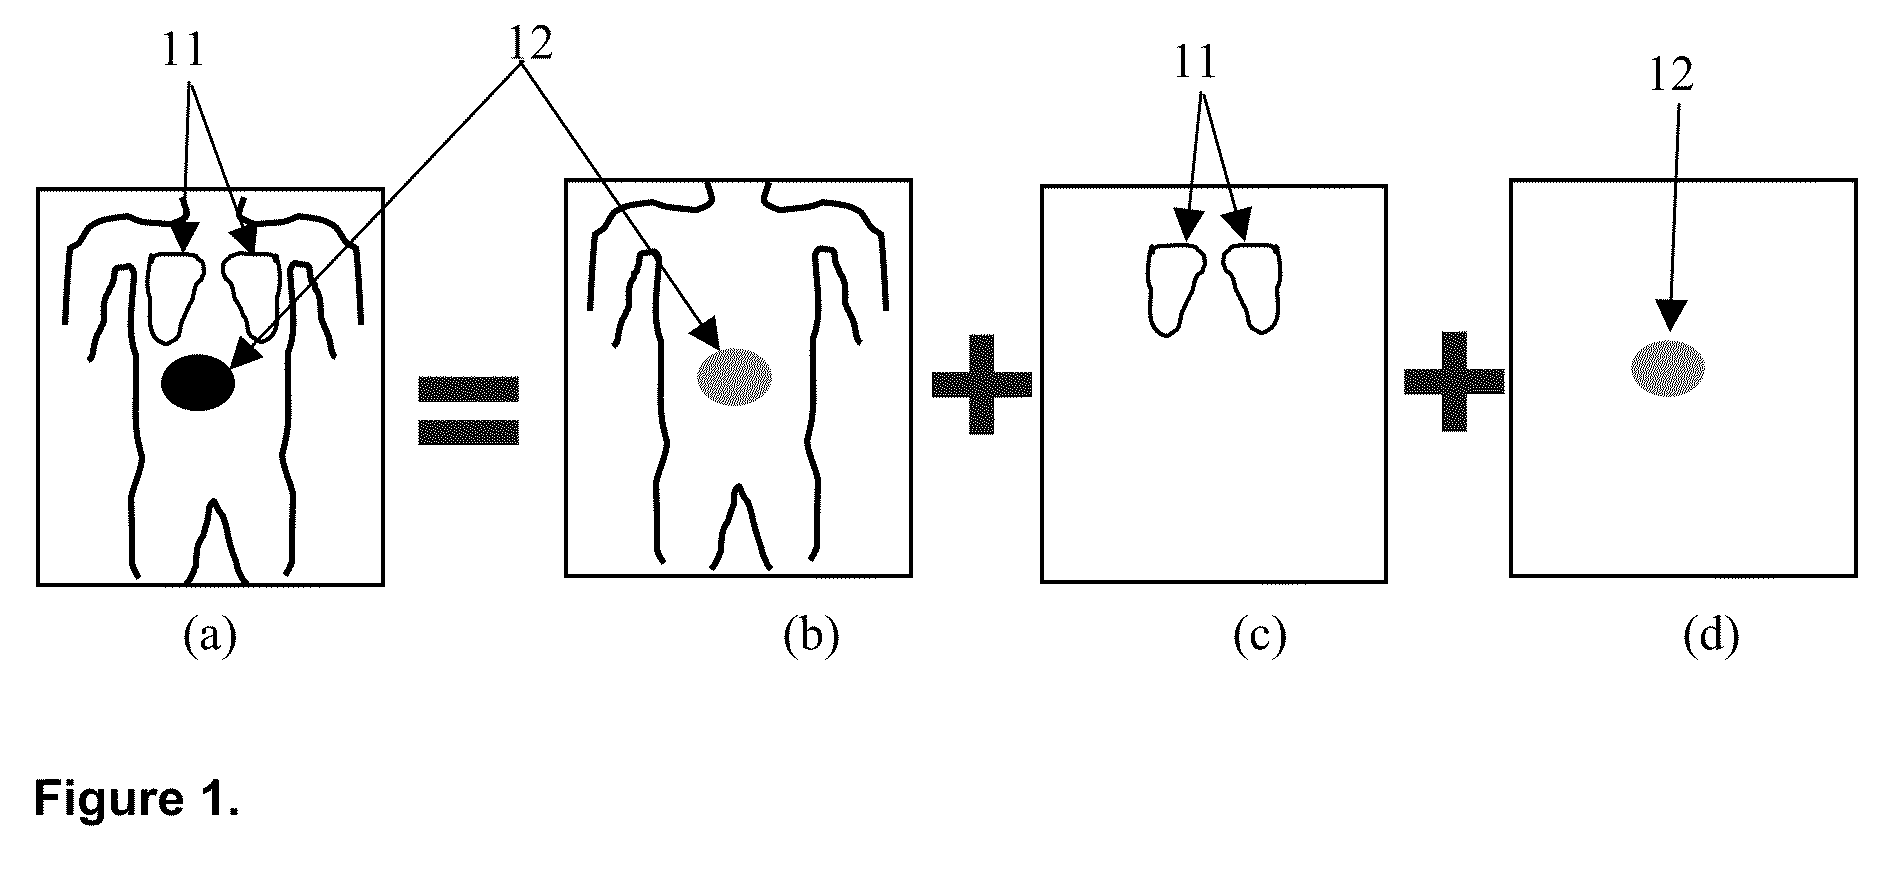 System and Method for Additive Spatial/Intensity Decomposition of Medical Images